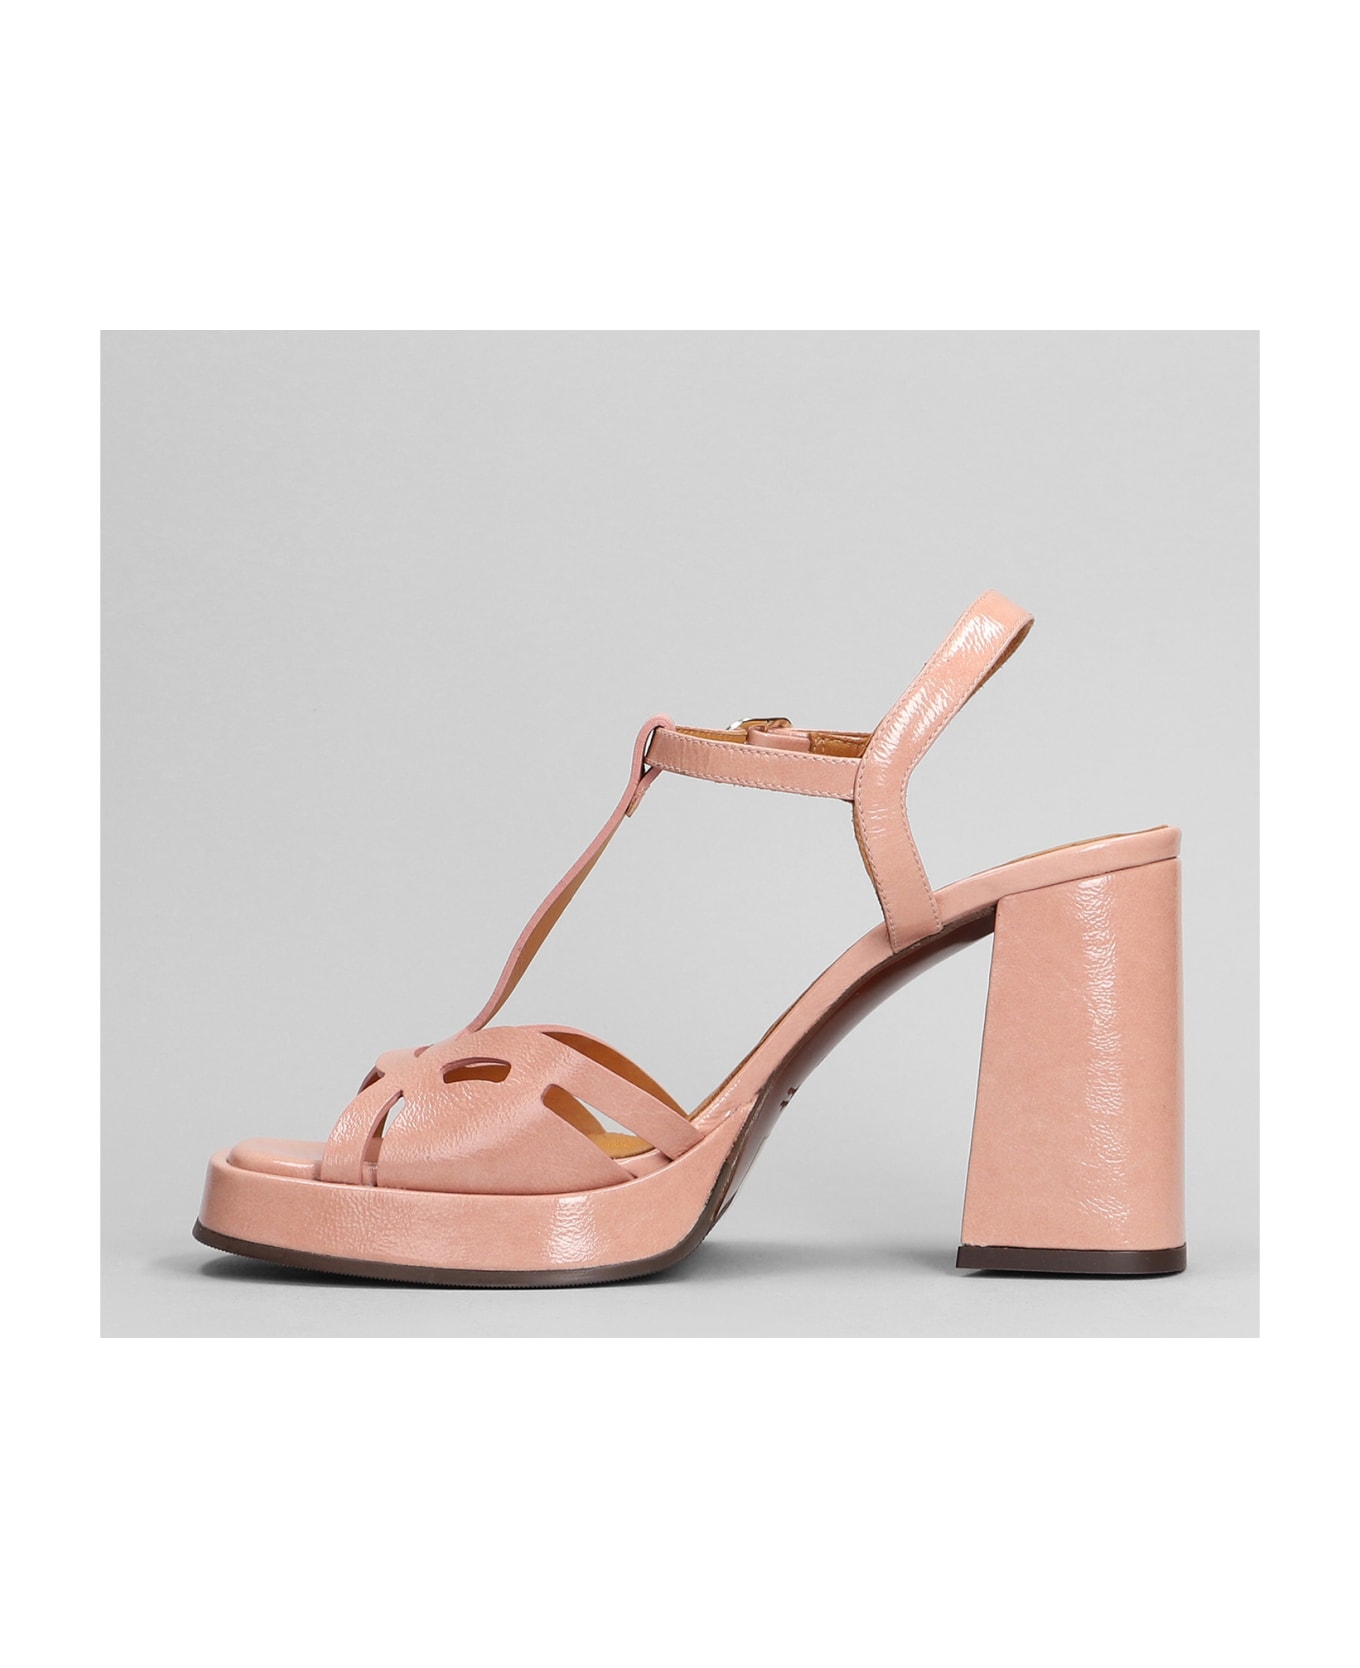 Chie Mihara Zinto Sandals In Rose-pink Leather - rose-pink